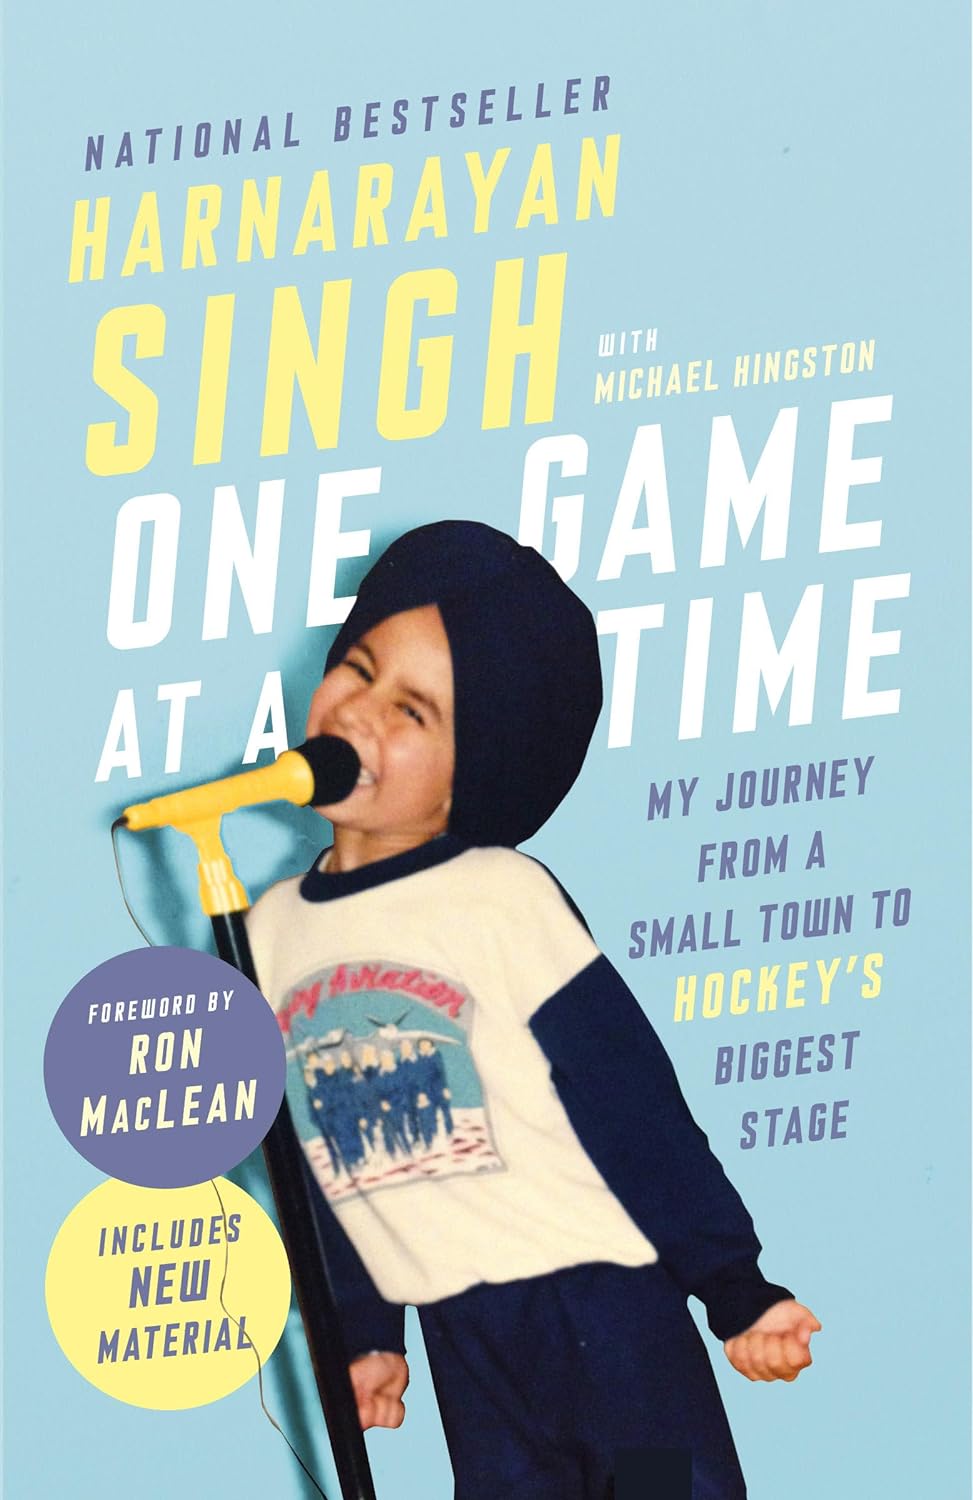 One Game at a Time: My Journey from a Small Town to Hockey's Biggest Stage - Harnarayan Singh (Bargain)